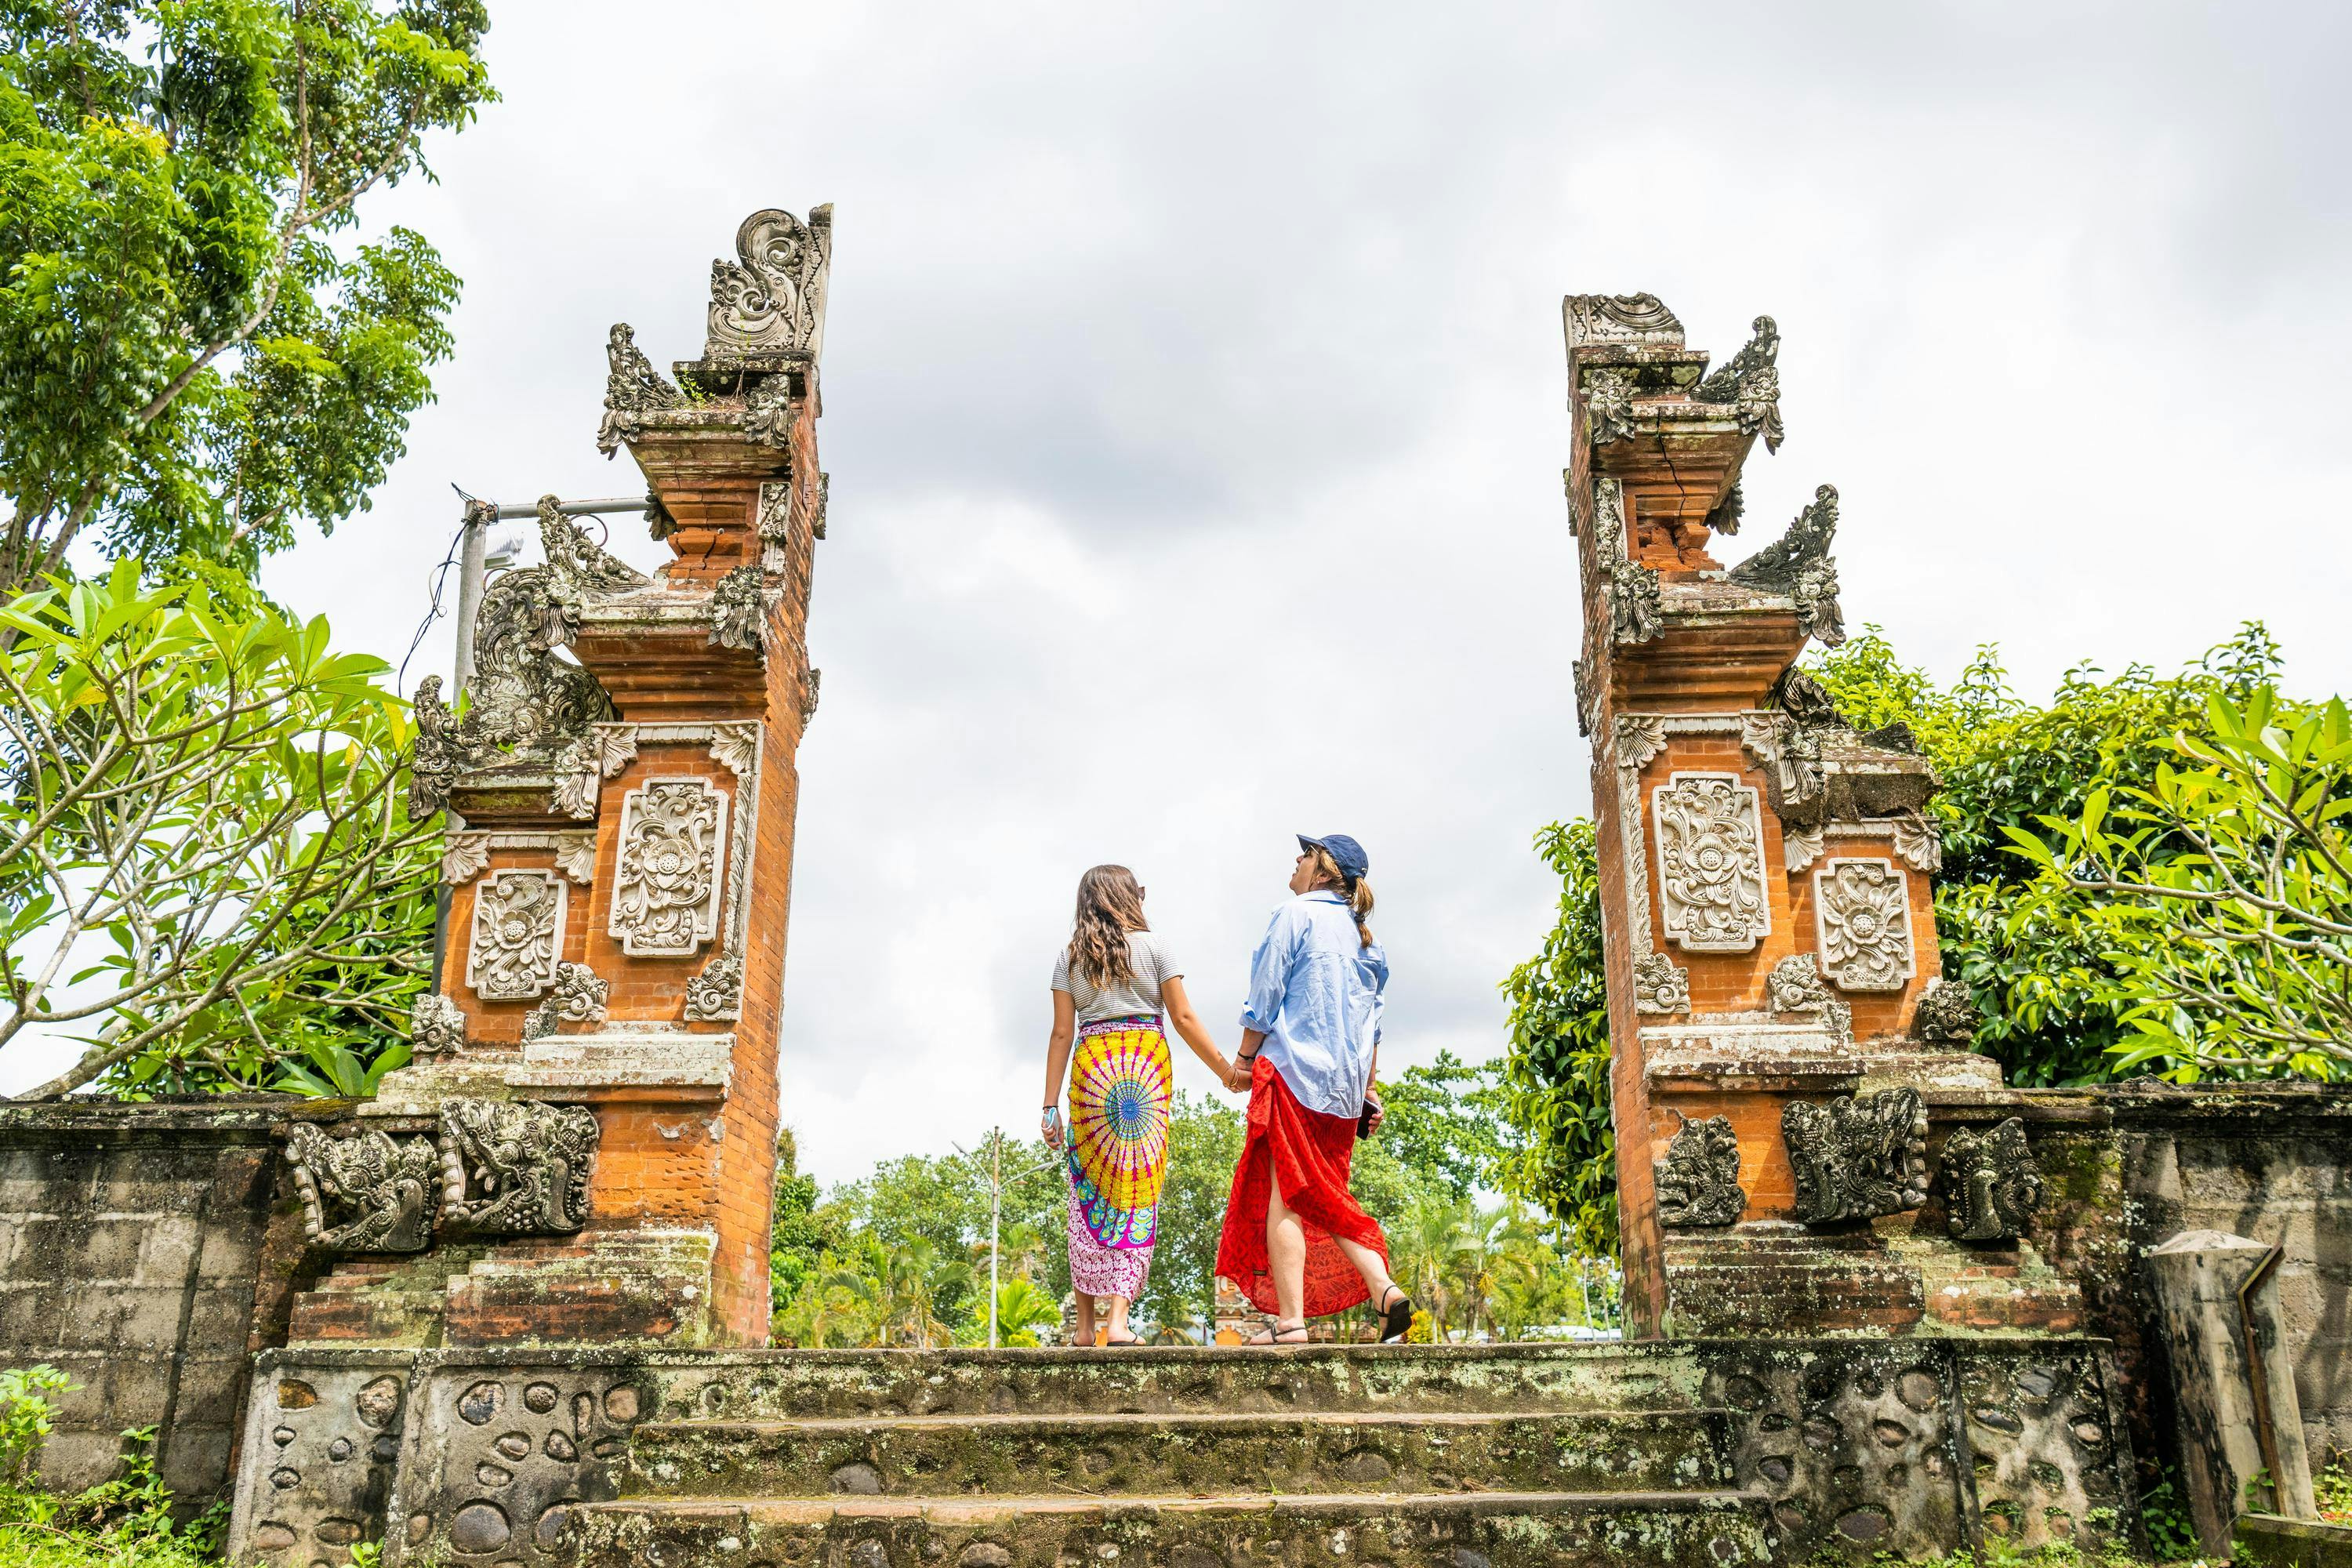 Guests explore Lingsar Temple a place where Hindus, Muslims, and Buddhists worship. Lombok, West Nusa Tenggara, Indonesia